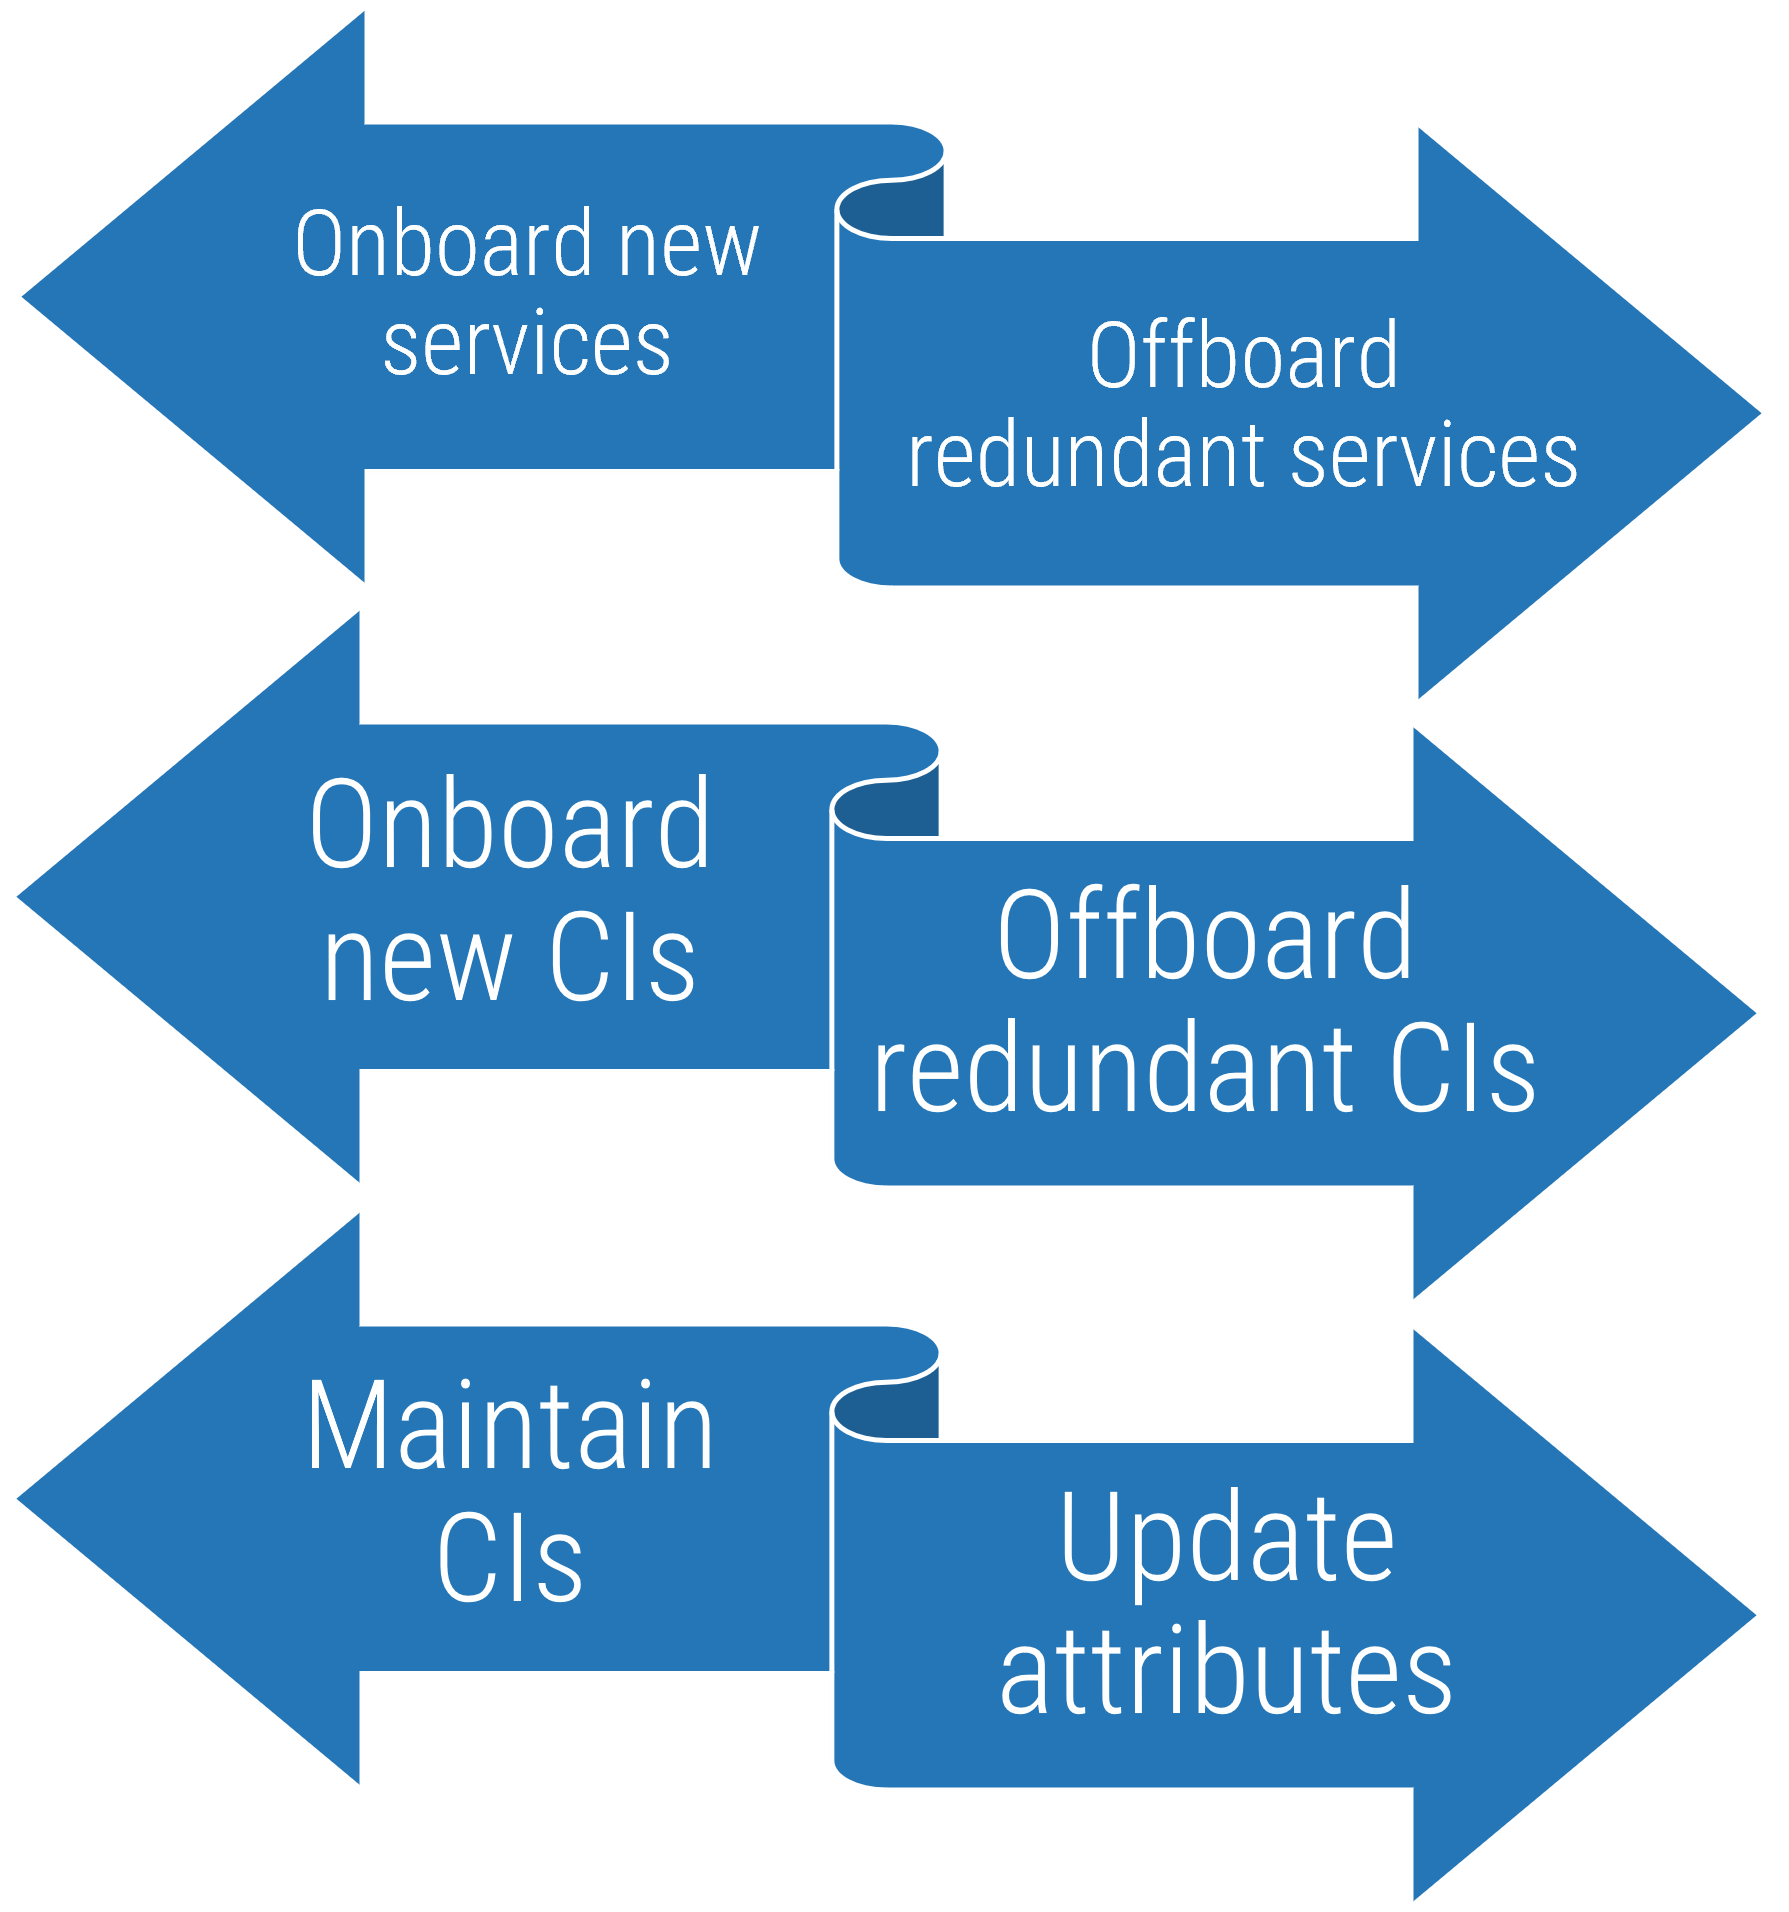 Onboard new services - Offboard Redundant Services. Onboard new CIs - Offboard Redundant CIs; Maintain CIs - Update Attributes.